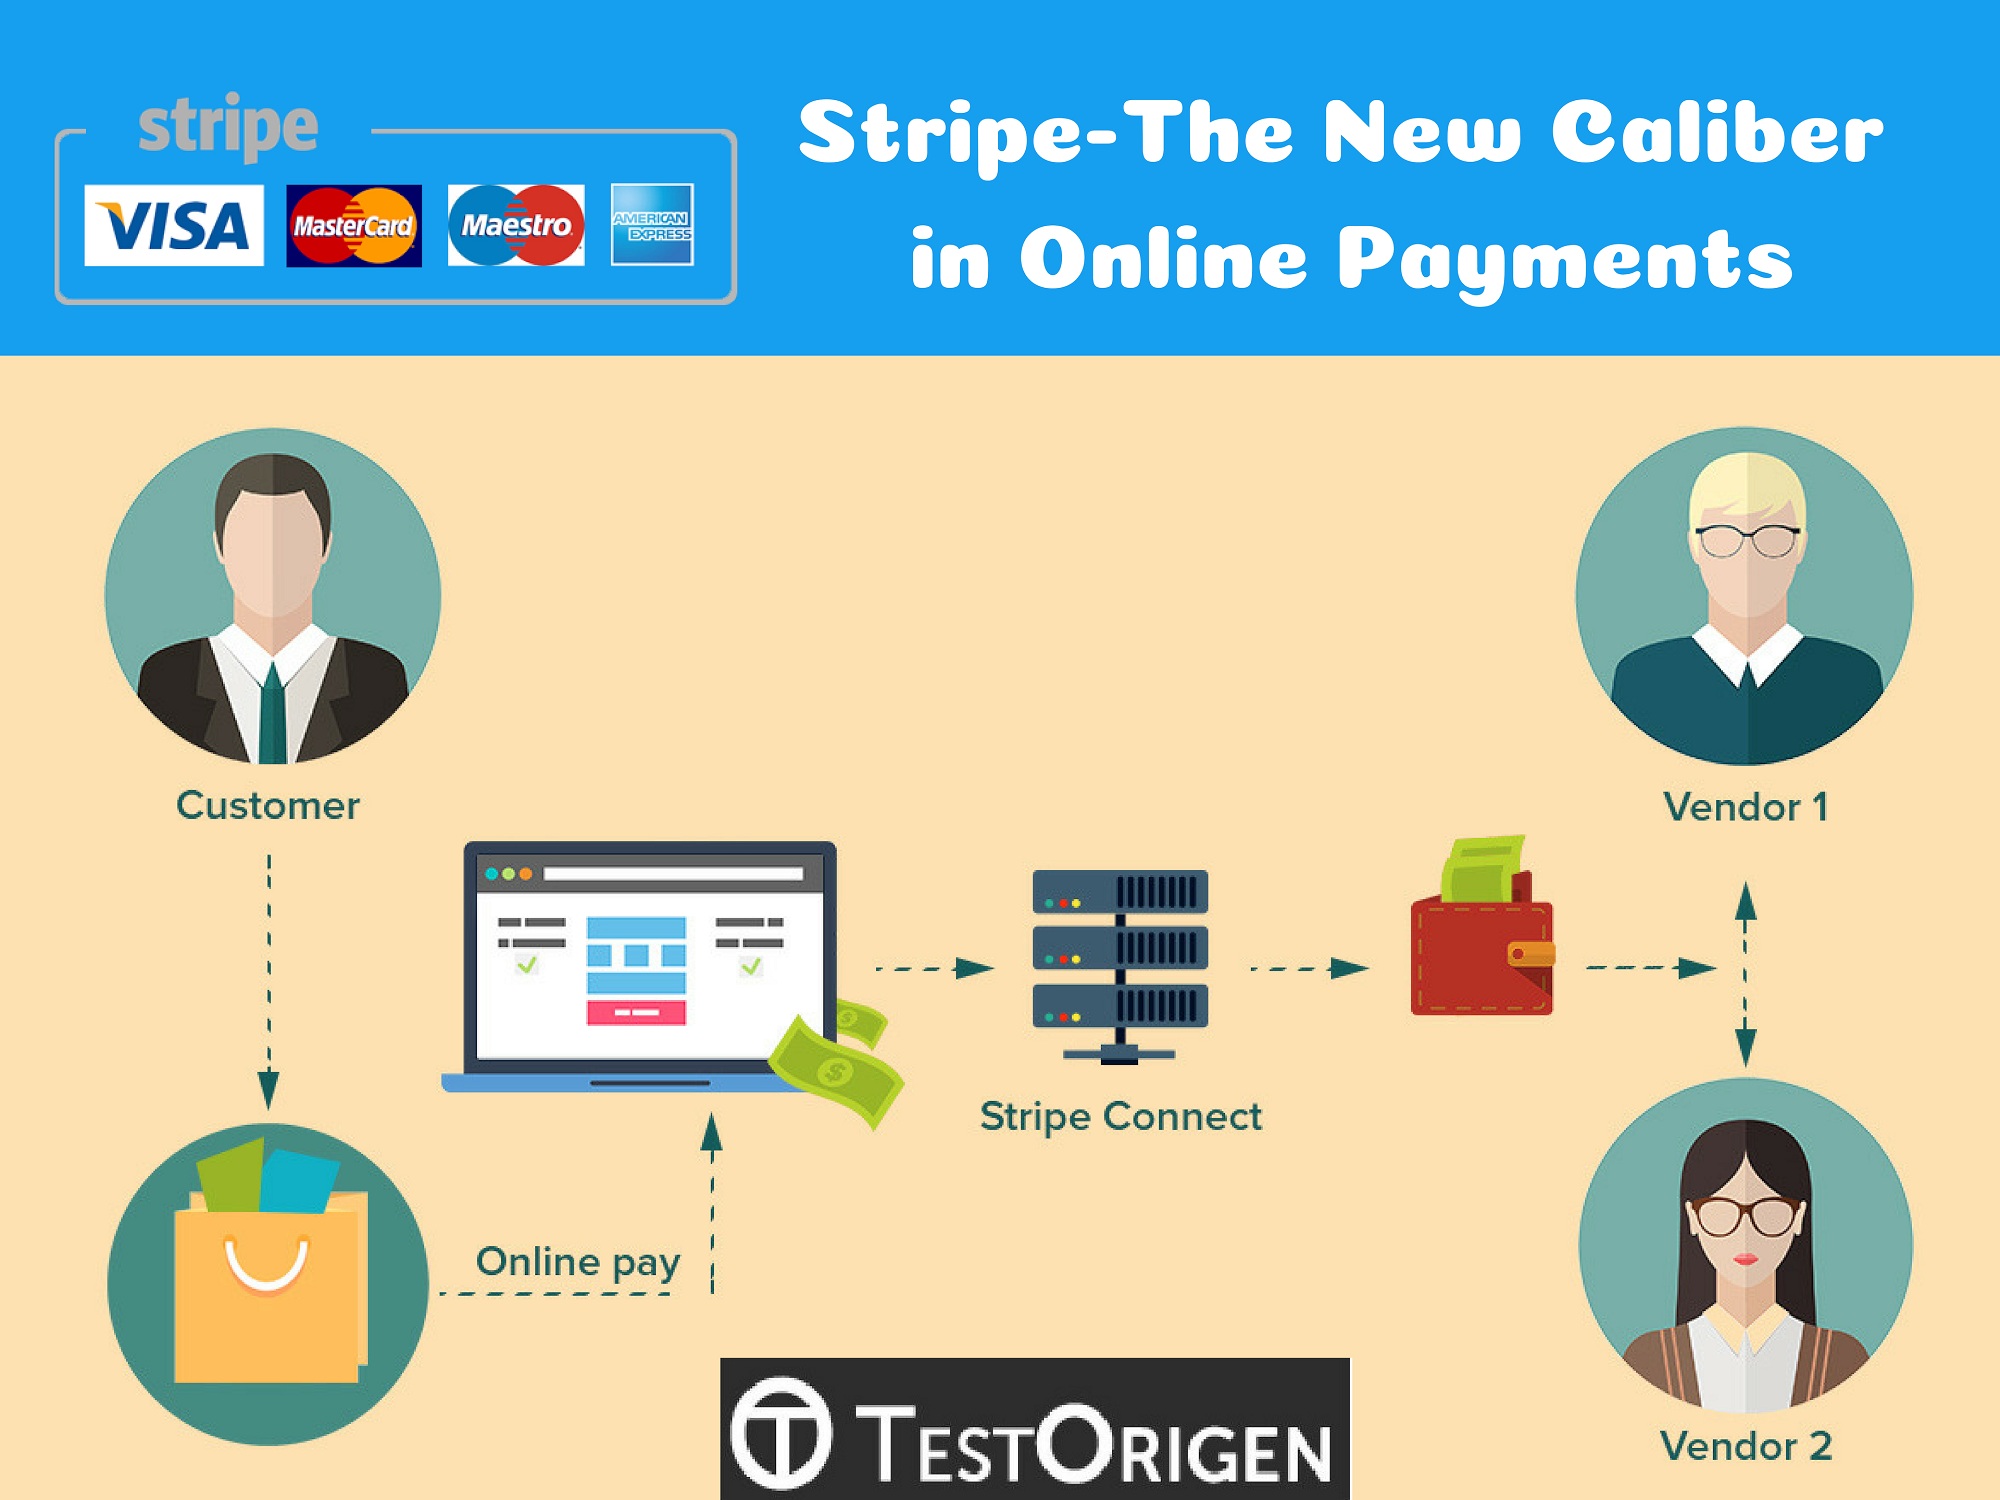 Stripe-The New Caliber in Online Payments